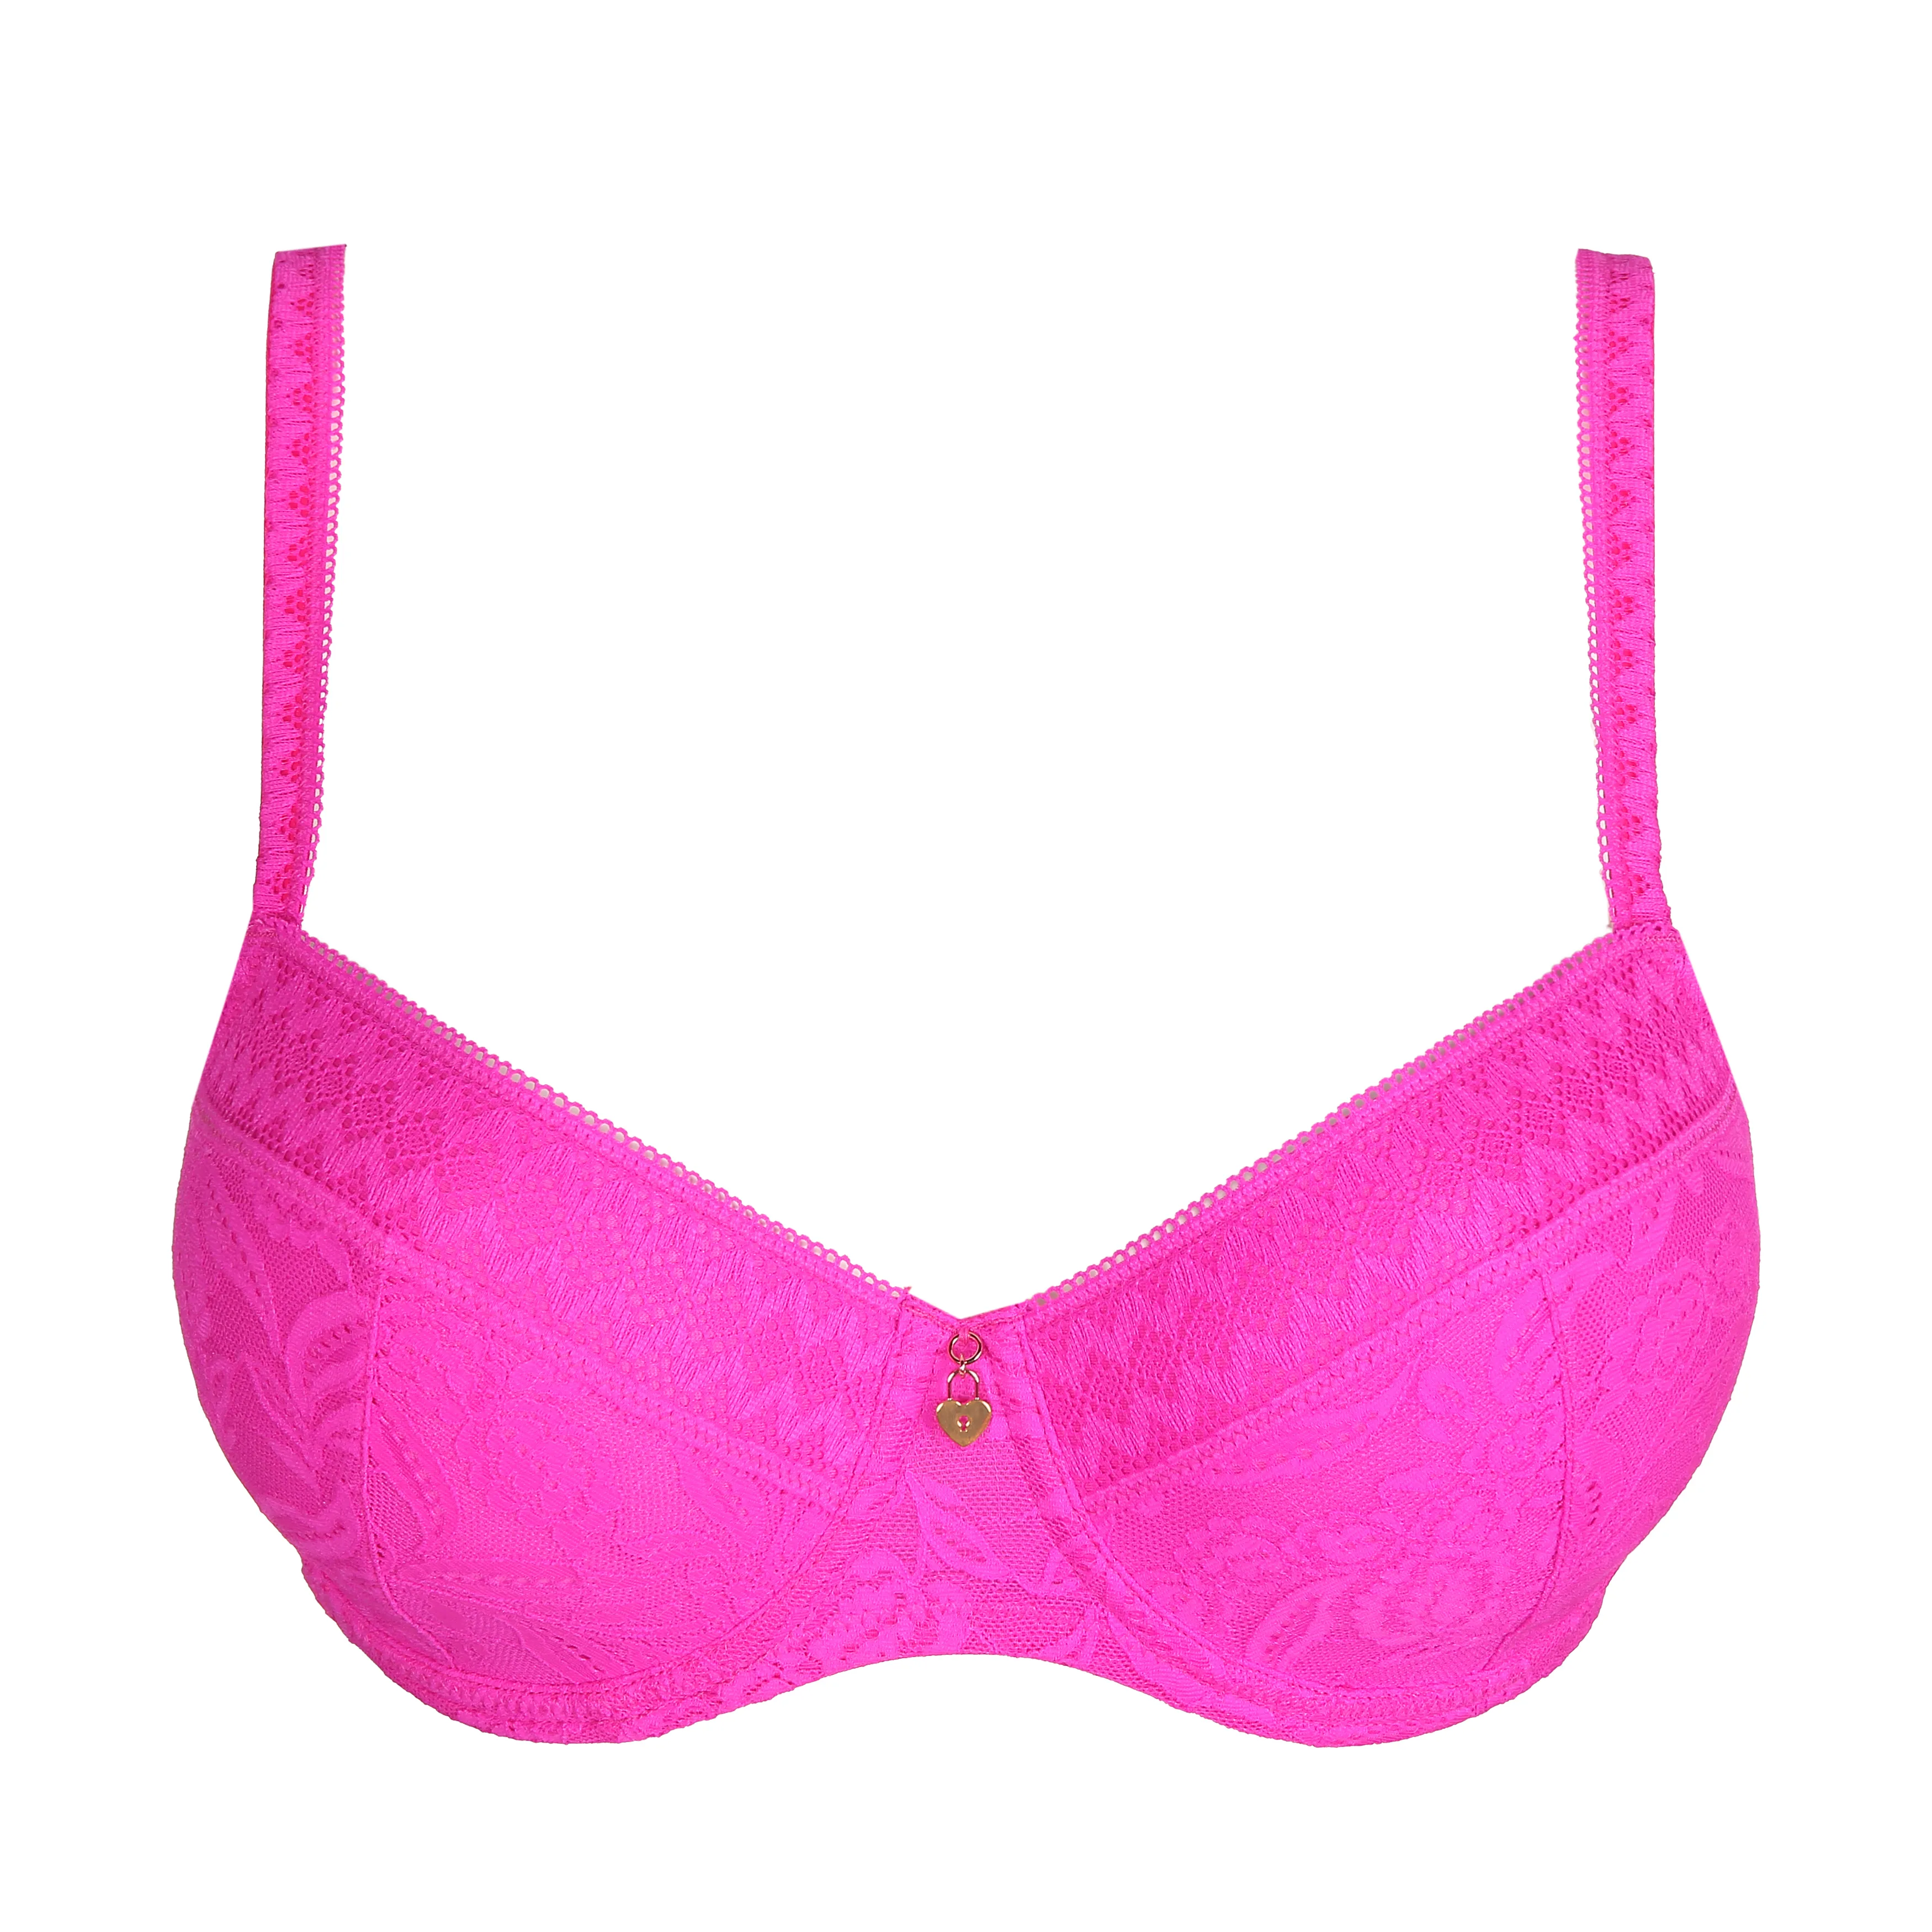 Collection Irresistible - Super push-up bra and Brazilian panty